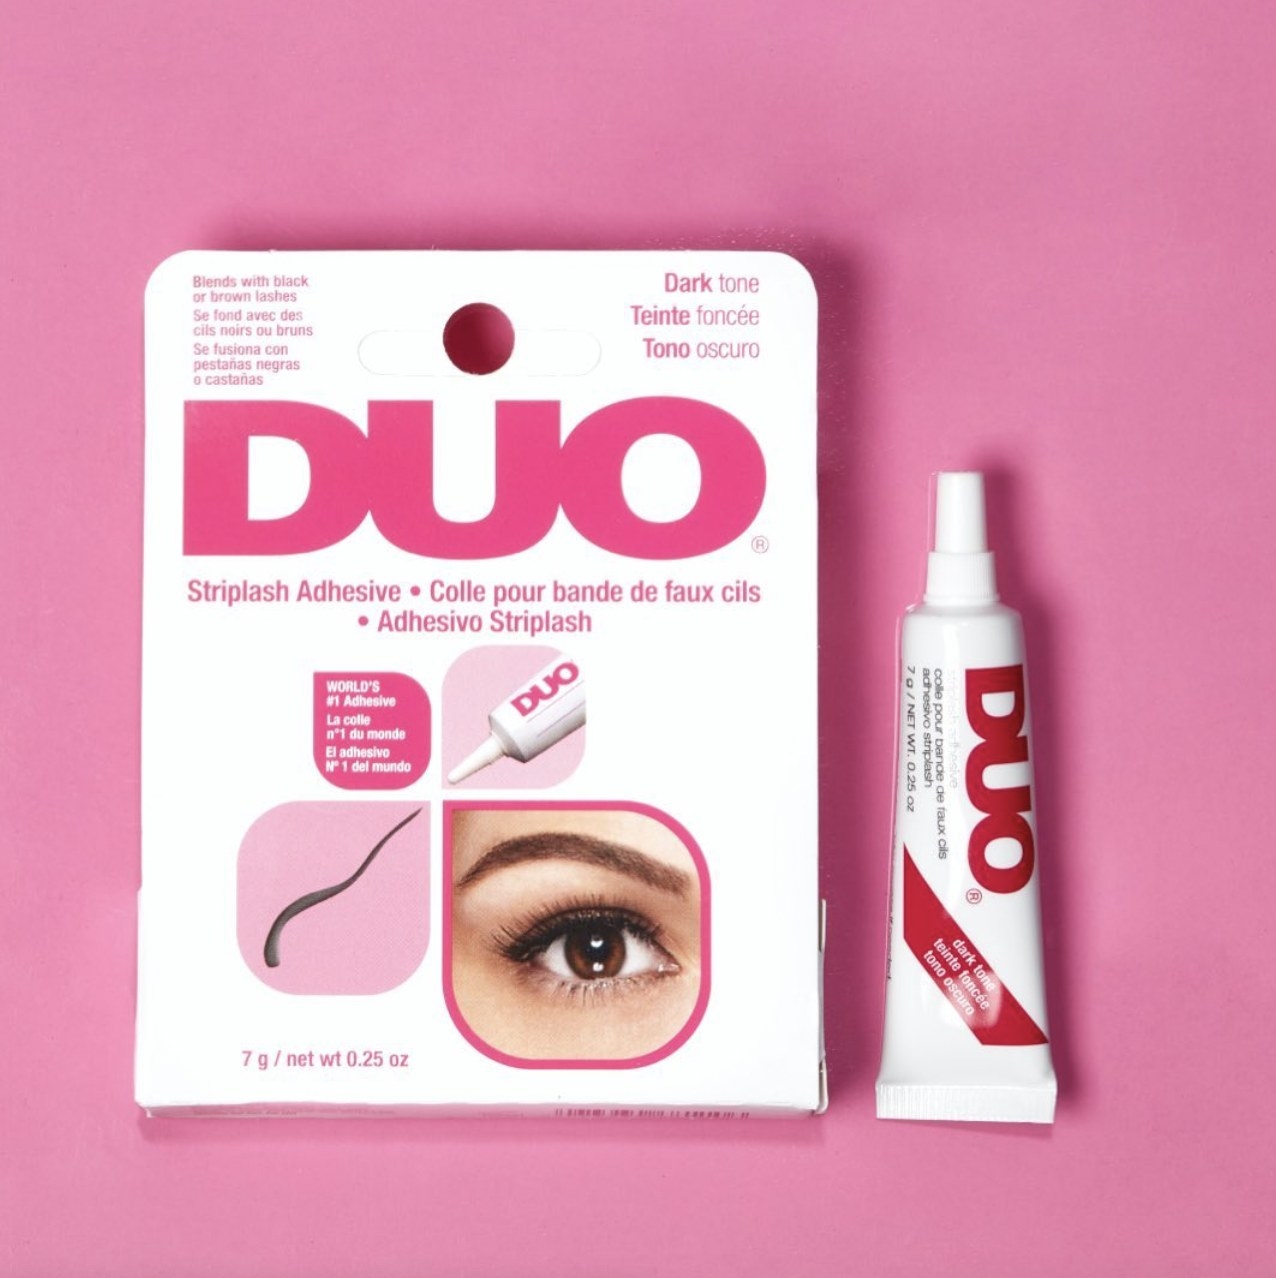 A package of strip lash adhesive and a tube of eyelash glue